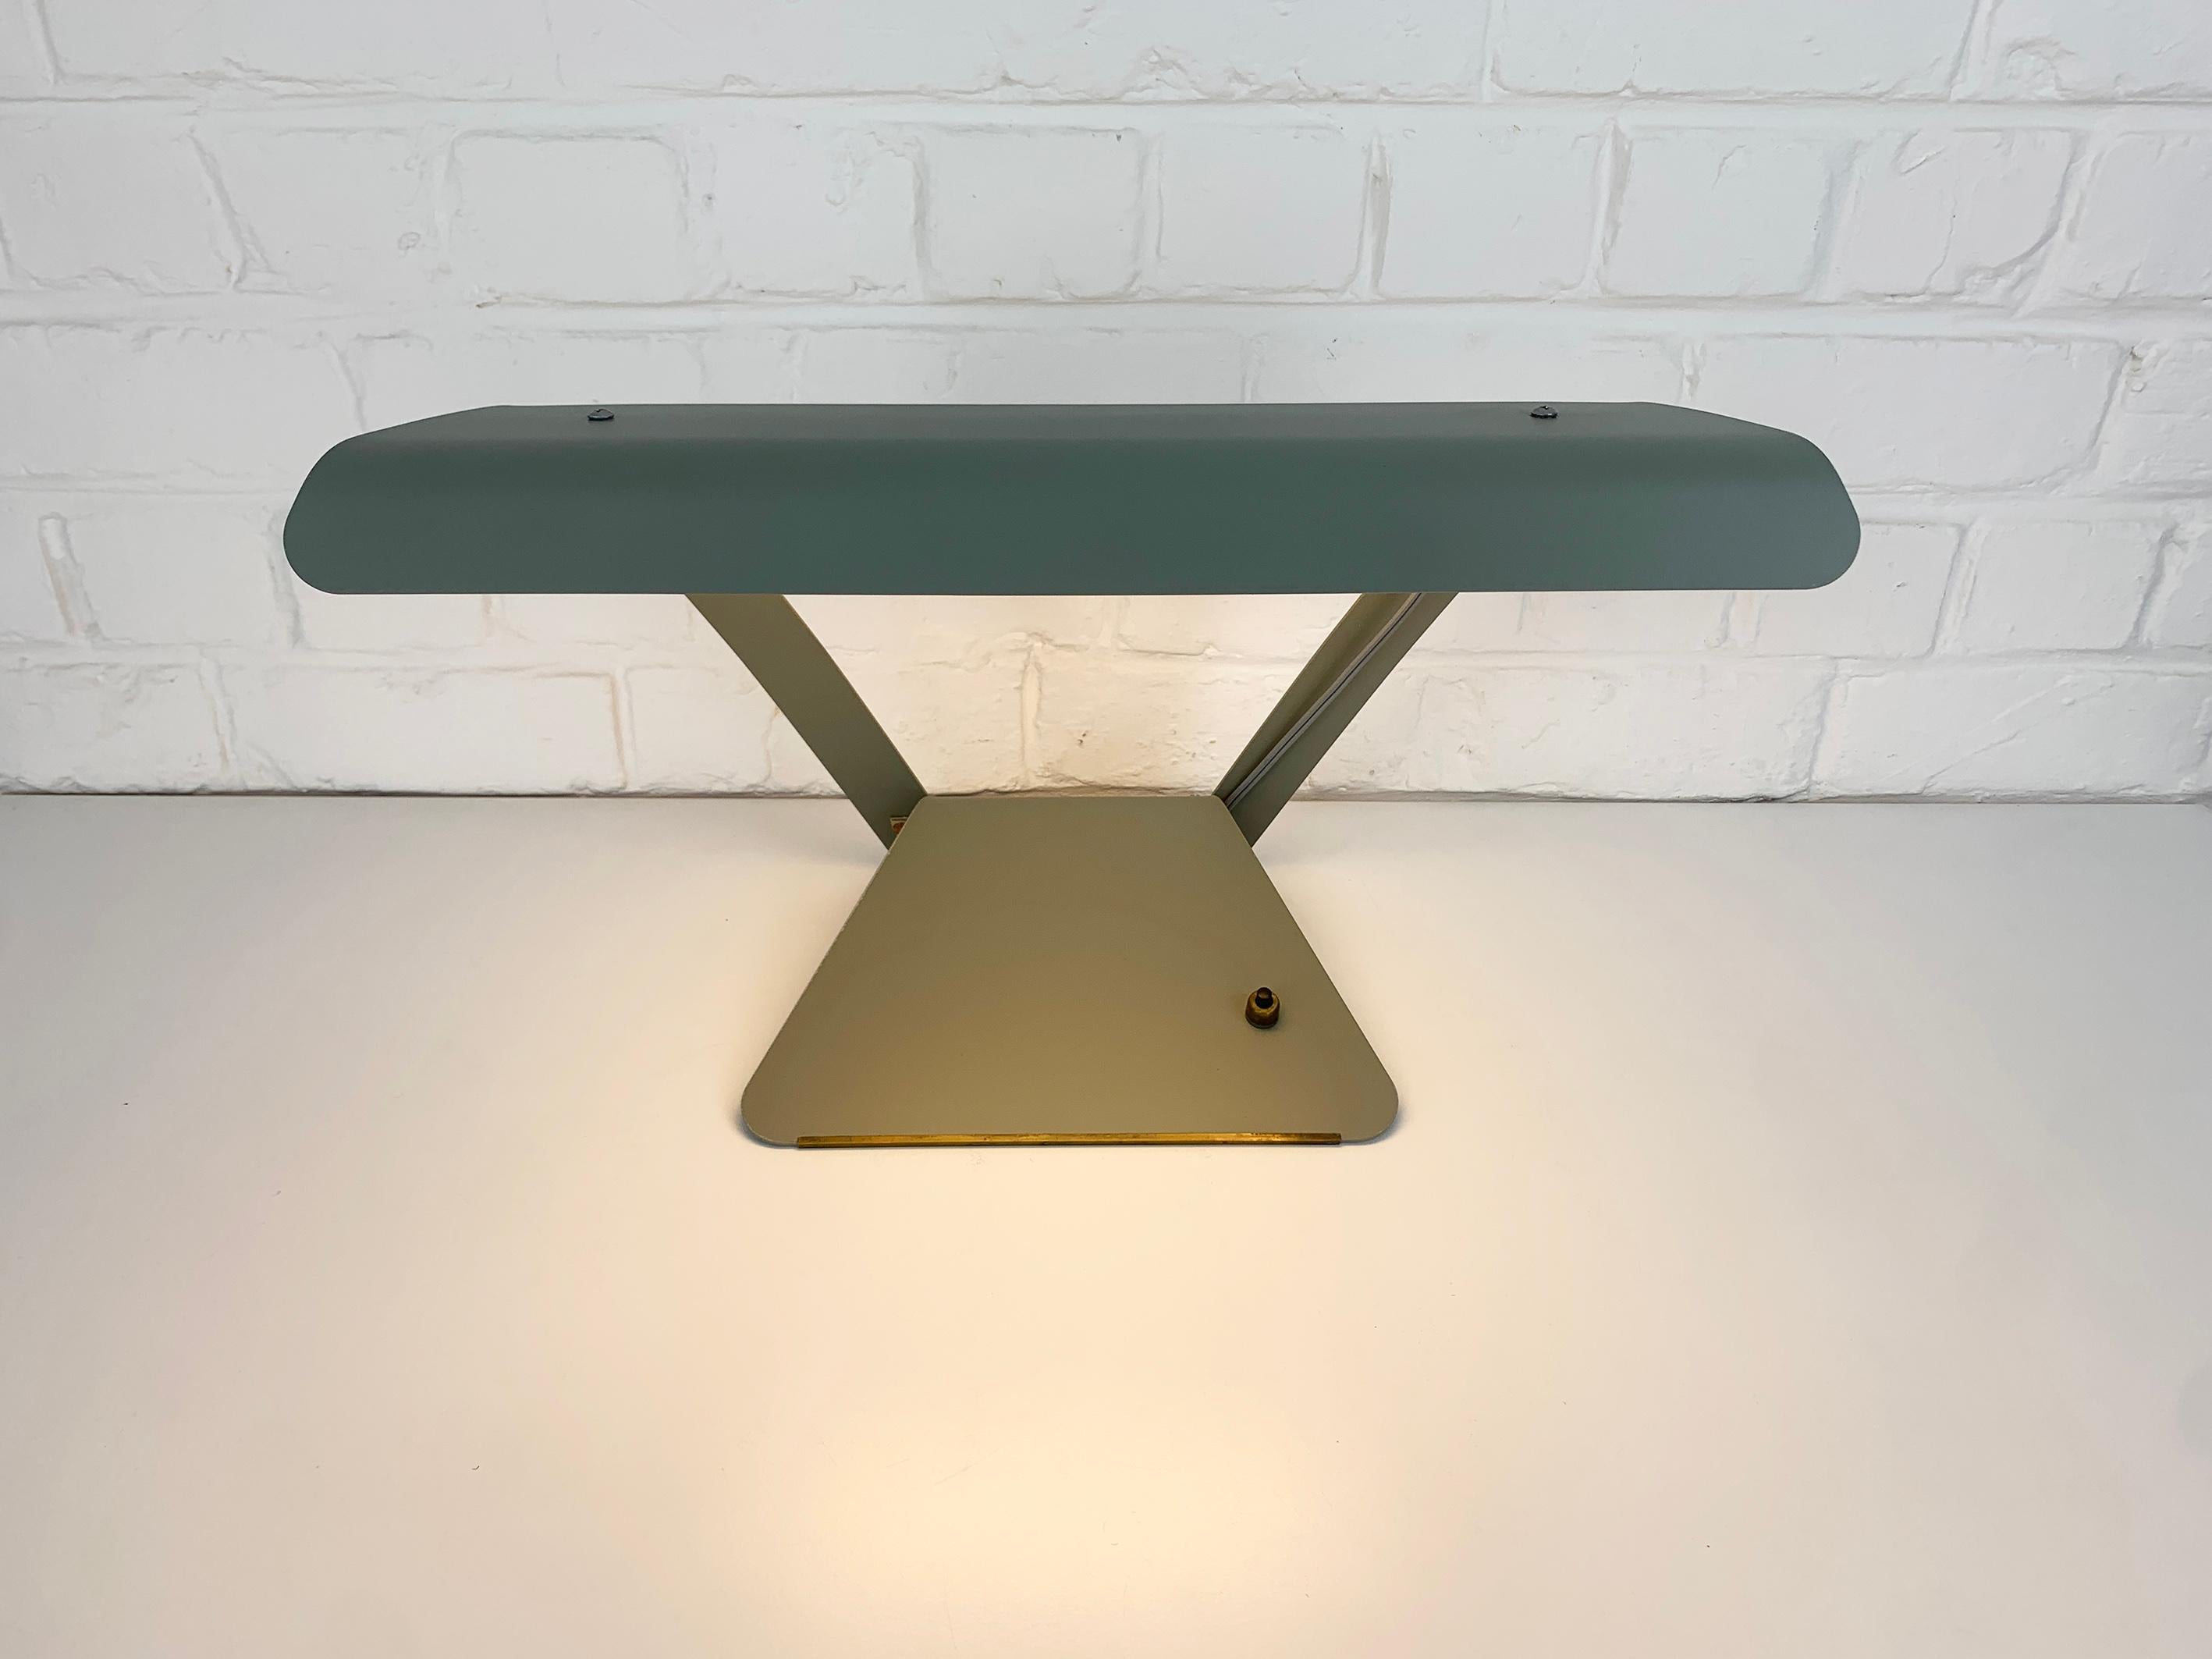 Painted Mid-Century Modernist Table or DeskLamp by Charlotte Perriand for Philips, 1950s For Sale